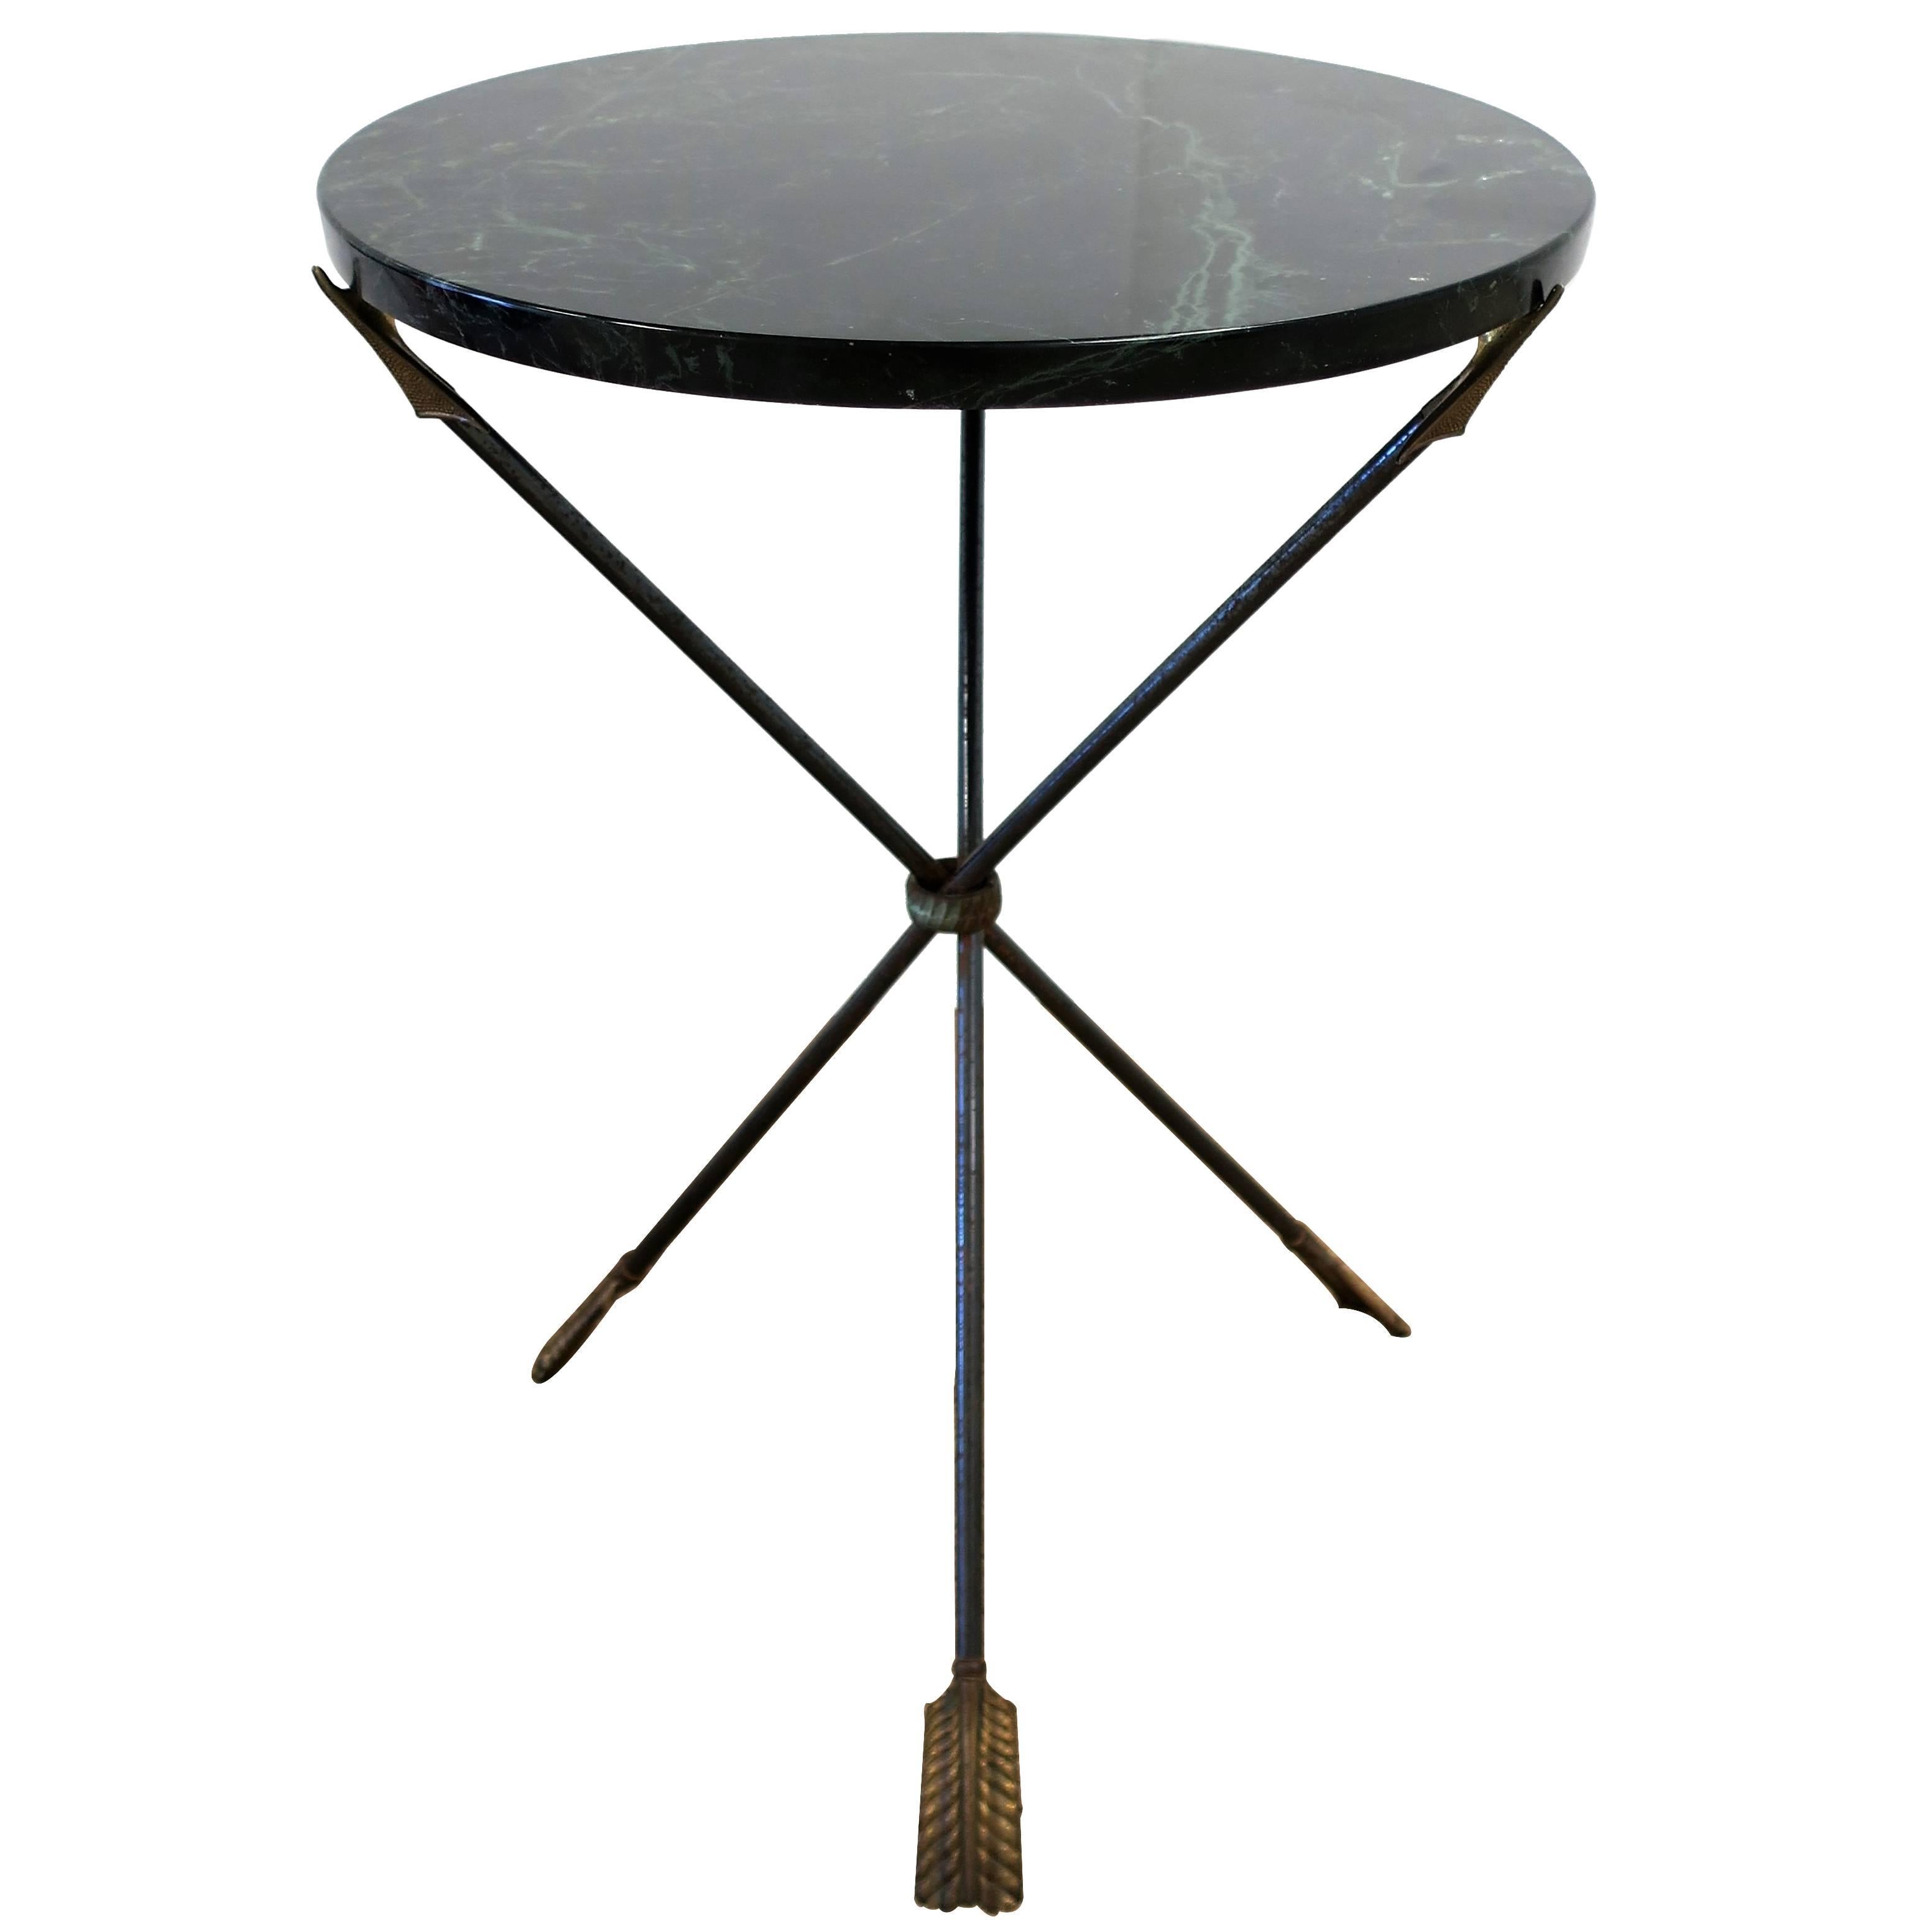 Italian Neoclassical Dark Green Marble and Brass Tripod Side Table